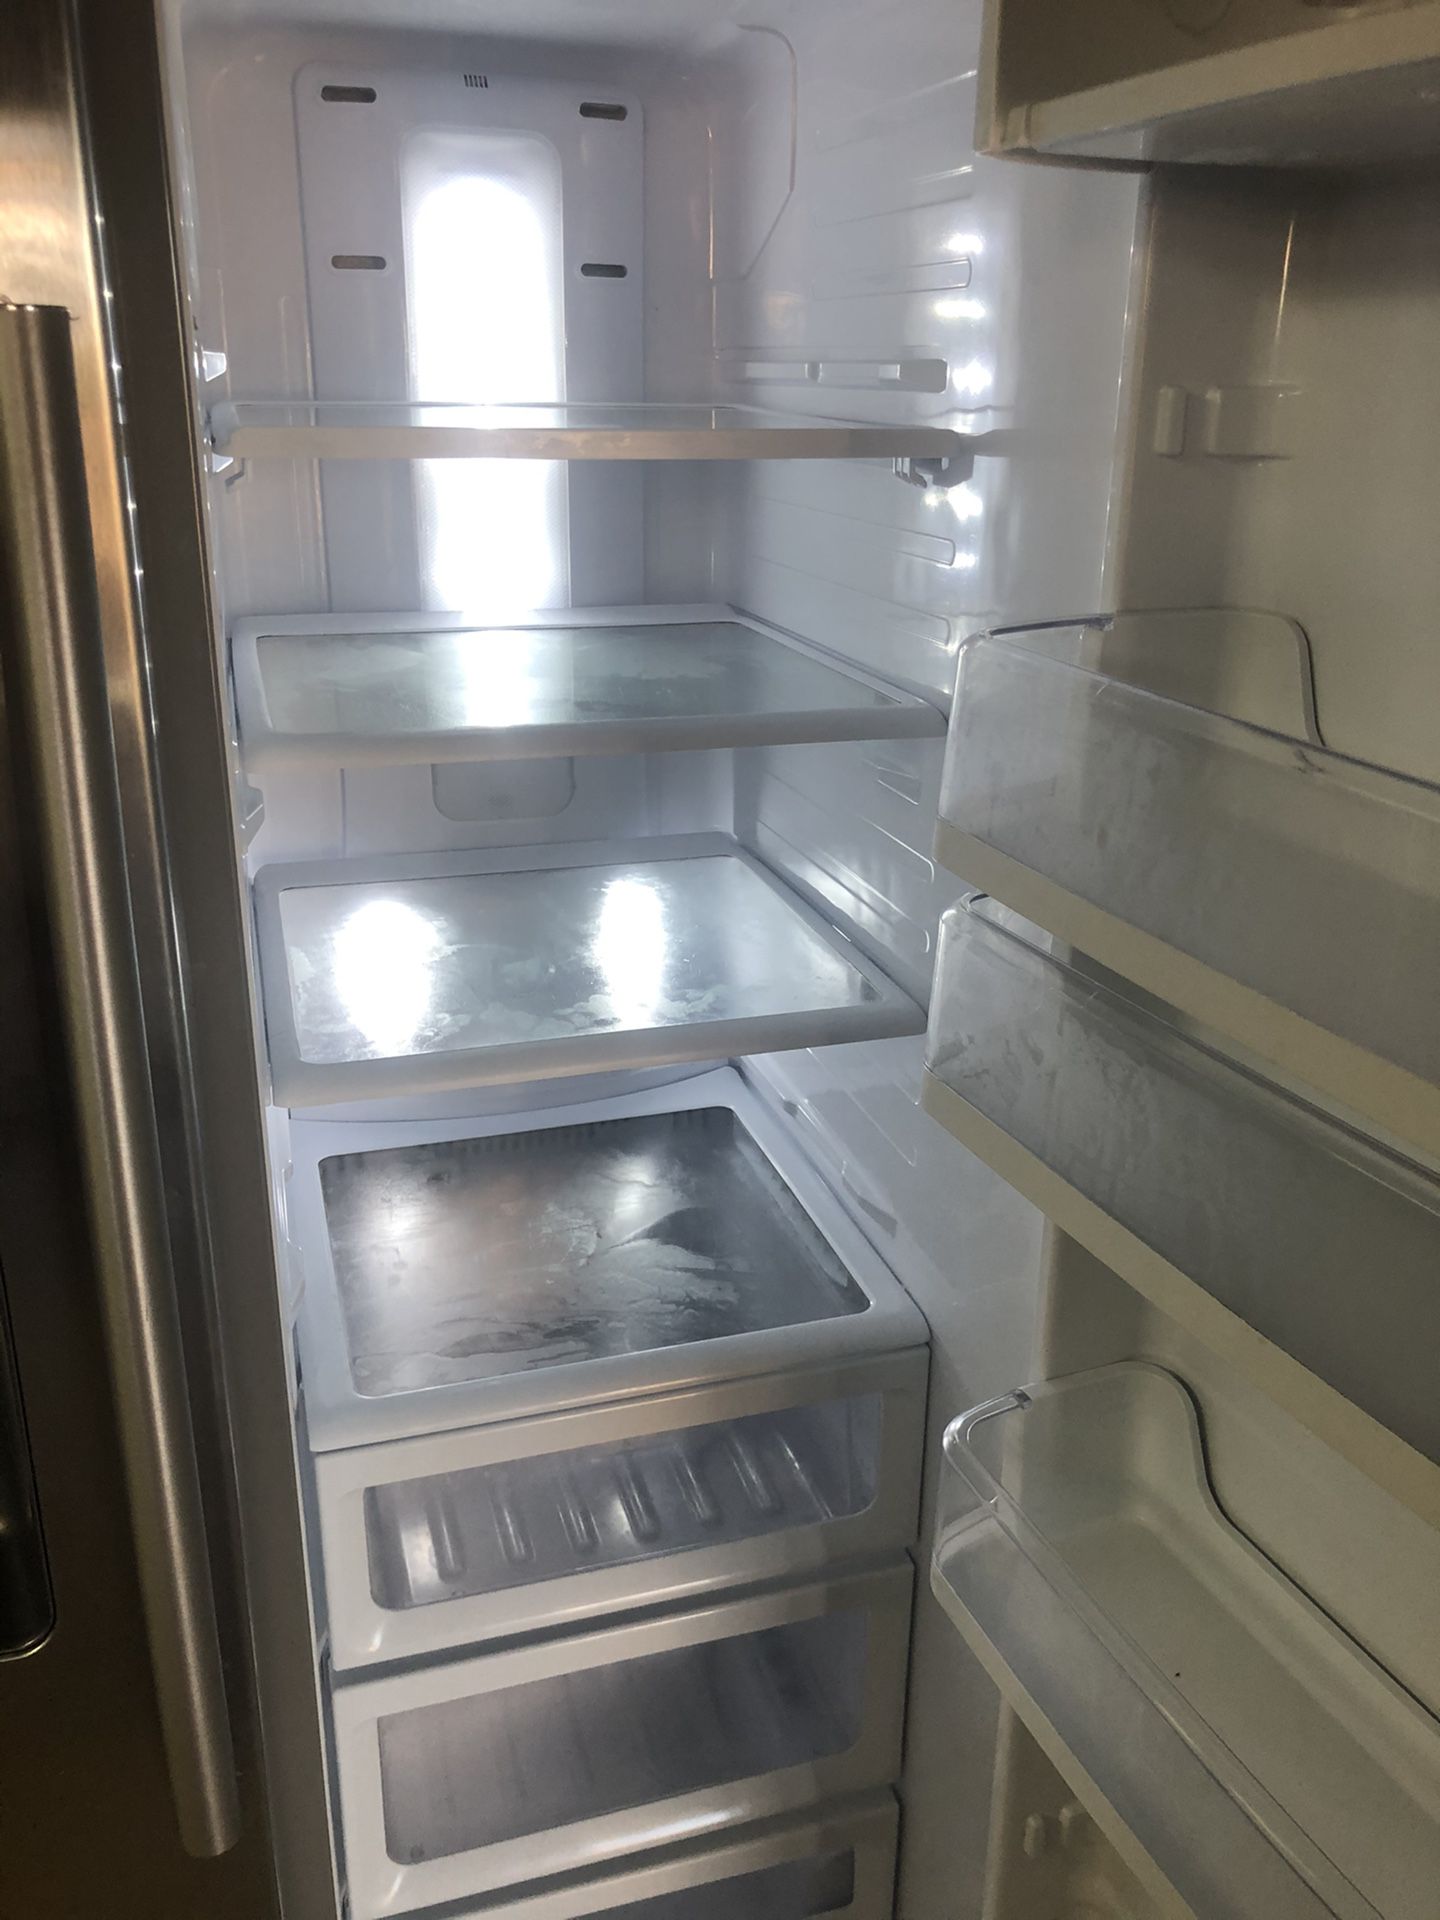 Samsung refrigerator ,side by side, ice maker.dual cooling